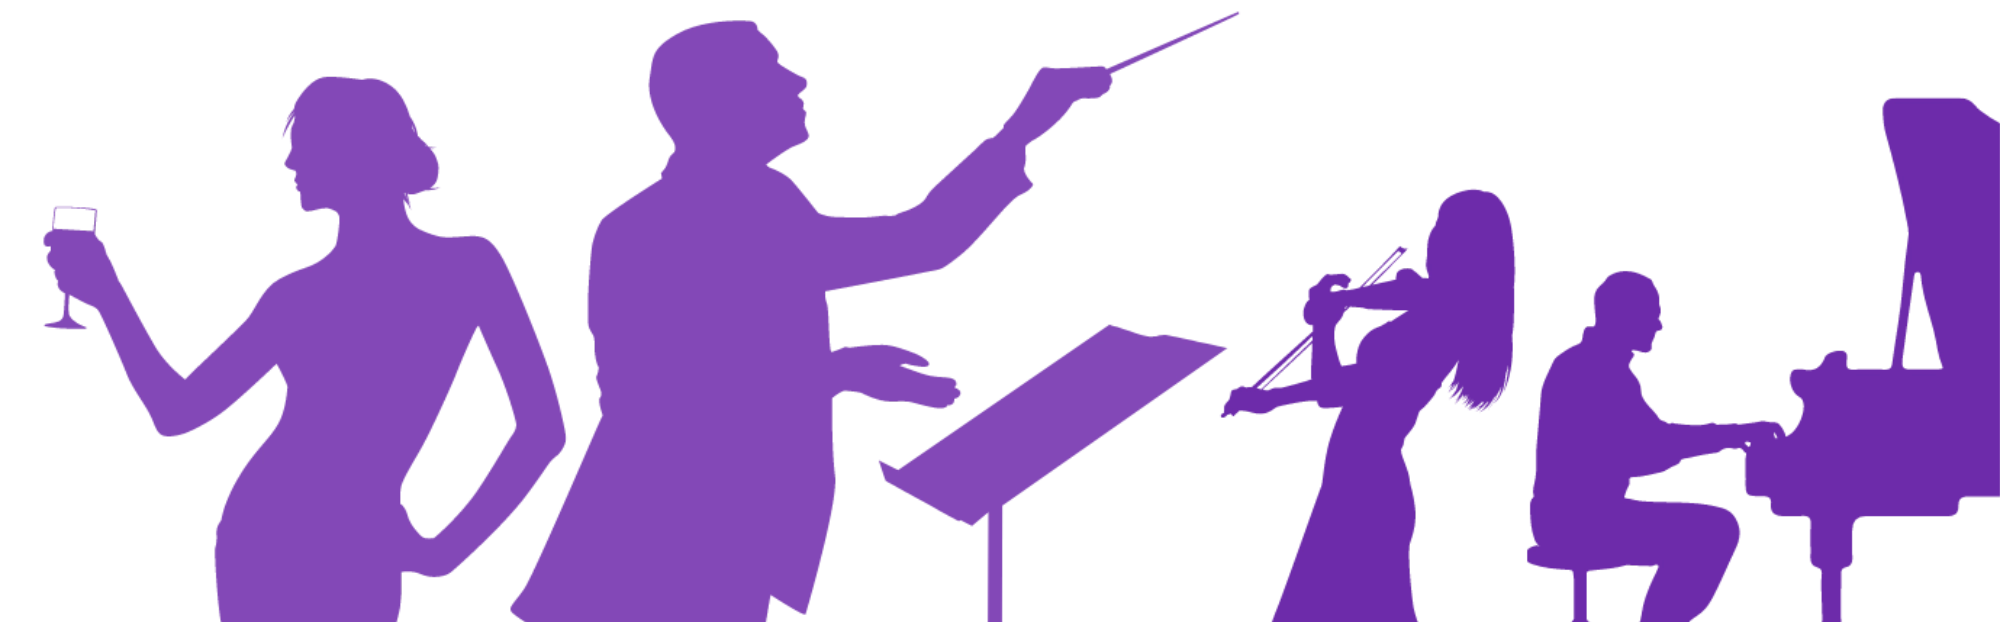 Silhouette graphic of musicians performing